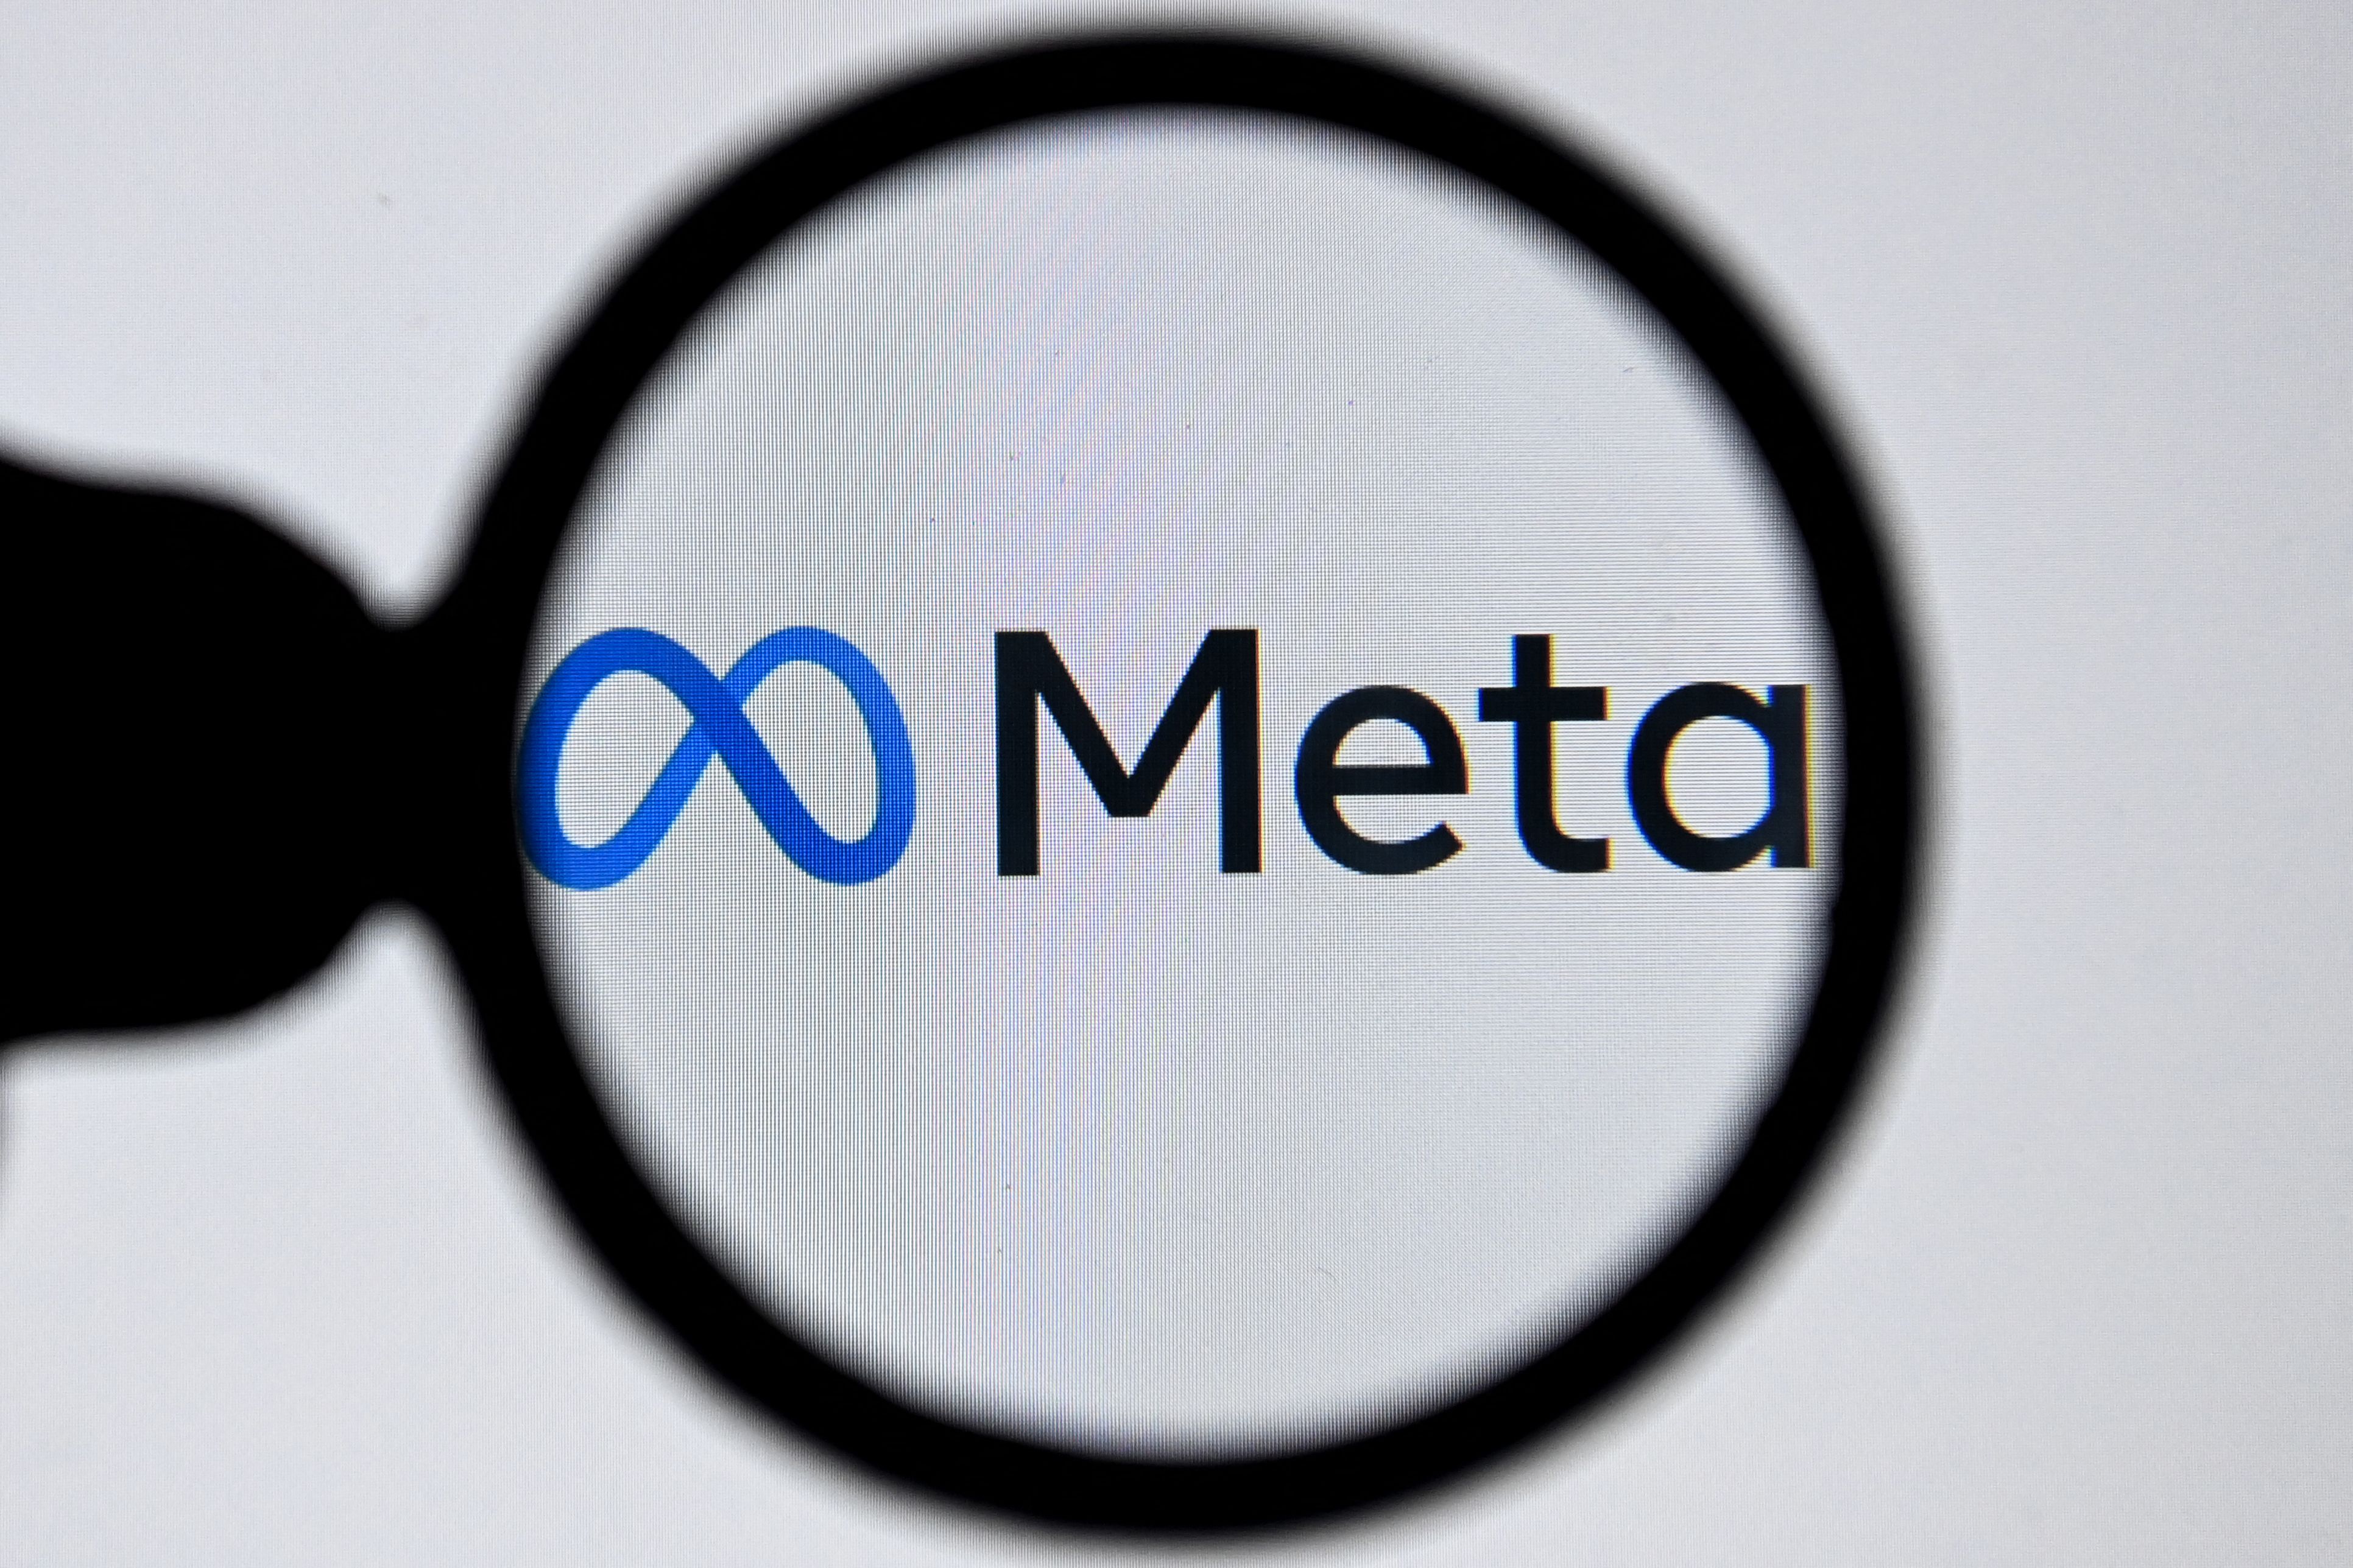 The Meta logo under a magnifying glass